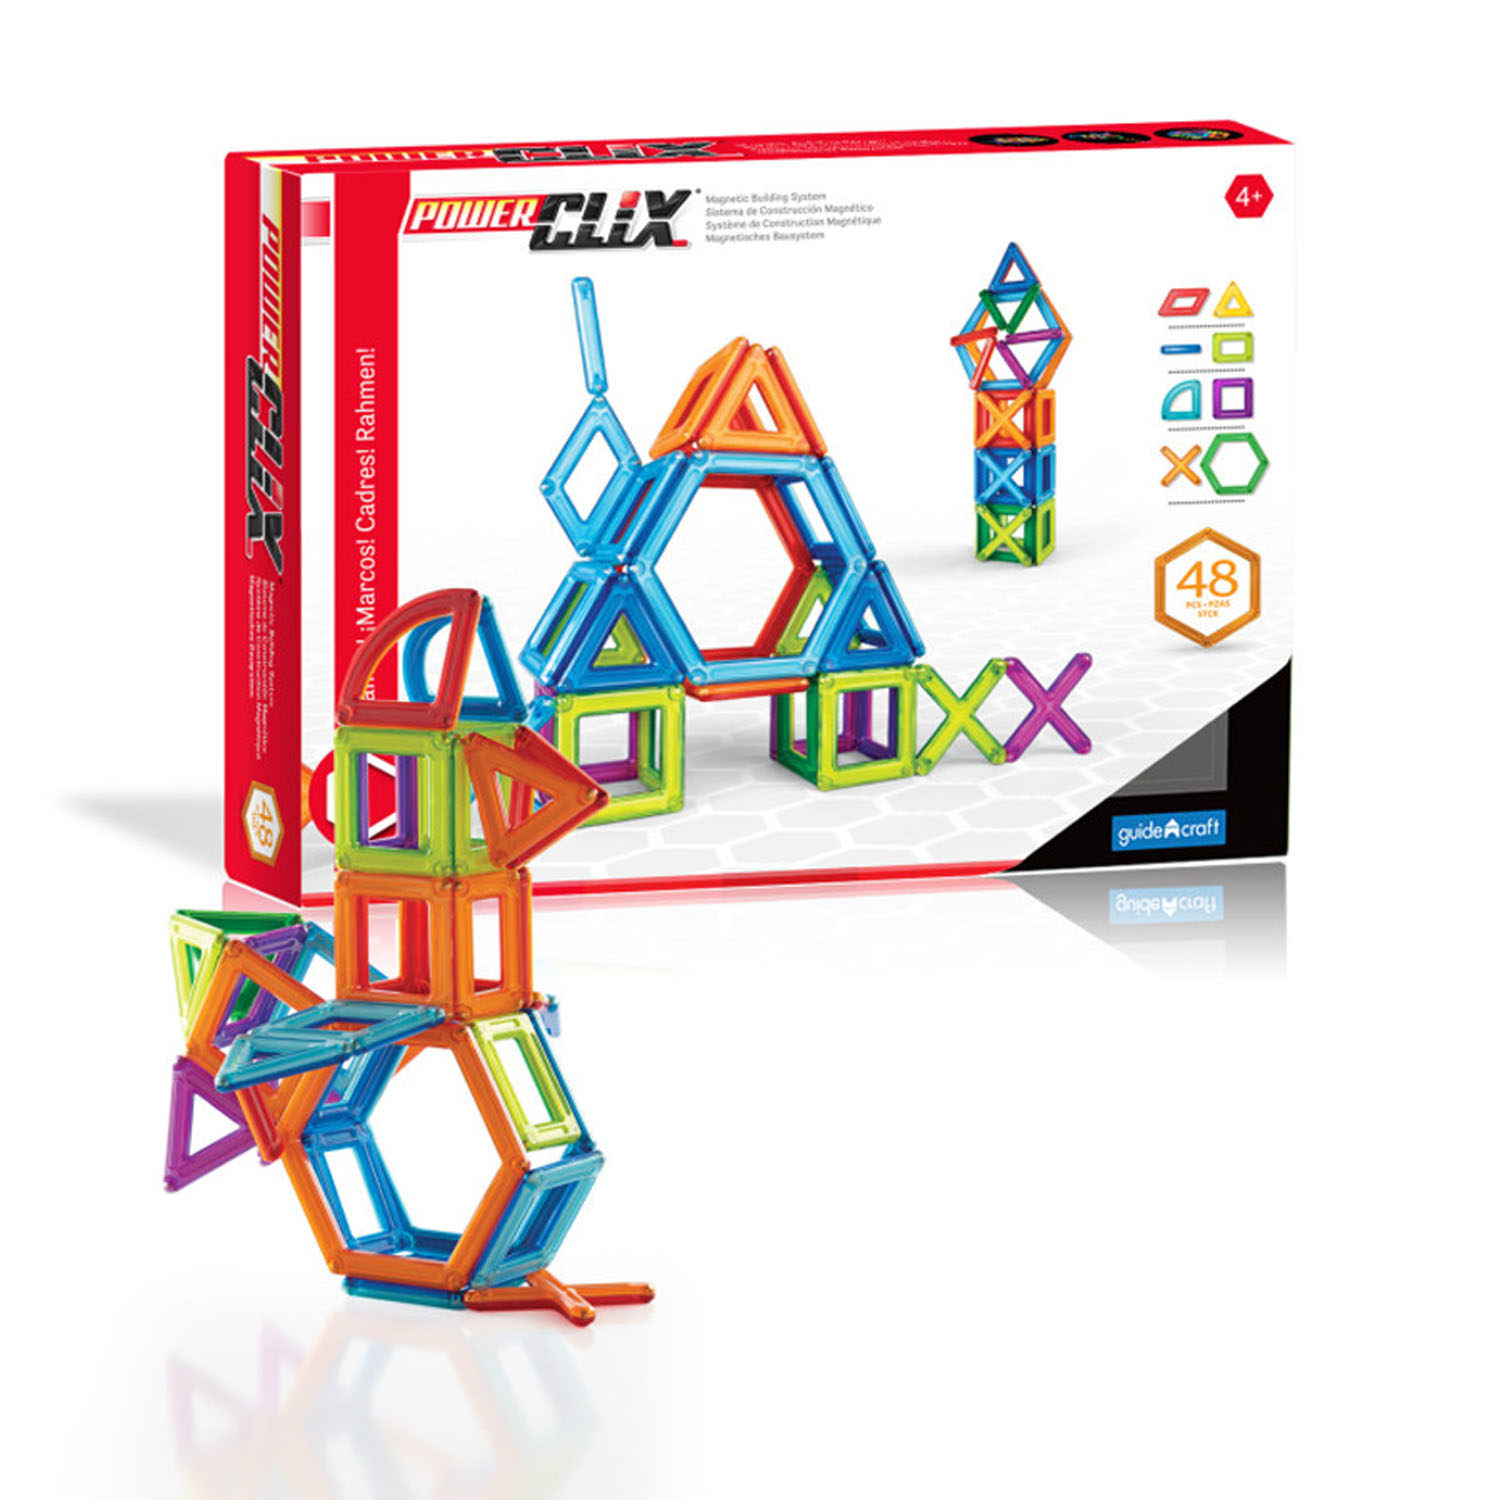 Guidecraft PowerClix Frames, Magnetic Building Set, 48 Pieces image number null